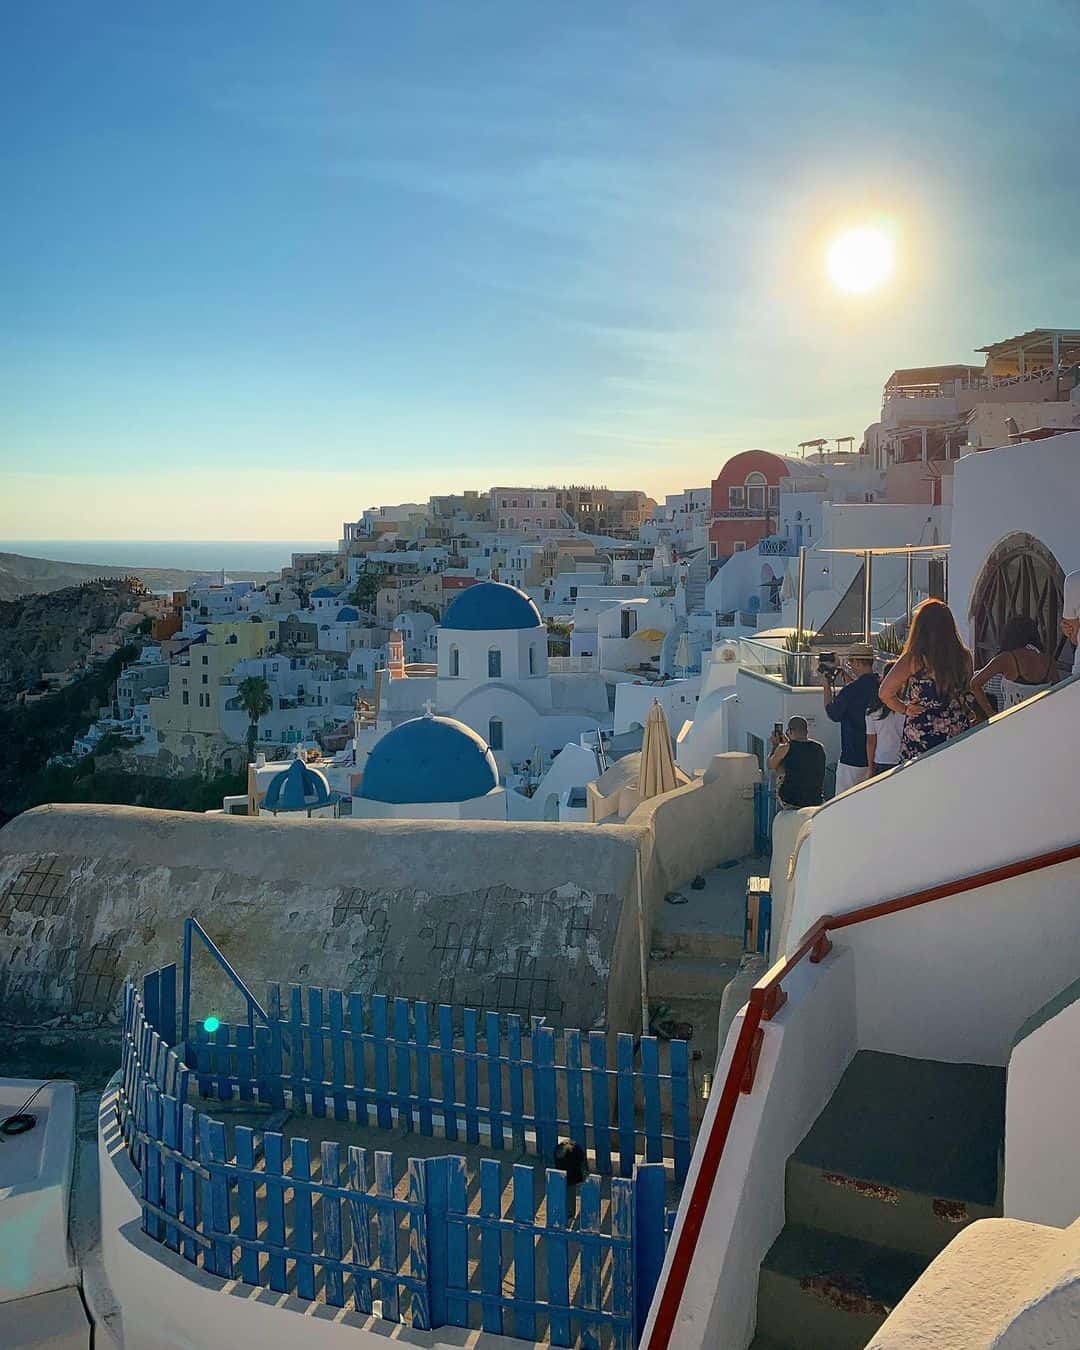 How to get from Athens to Santorini